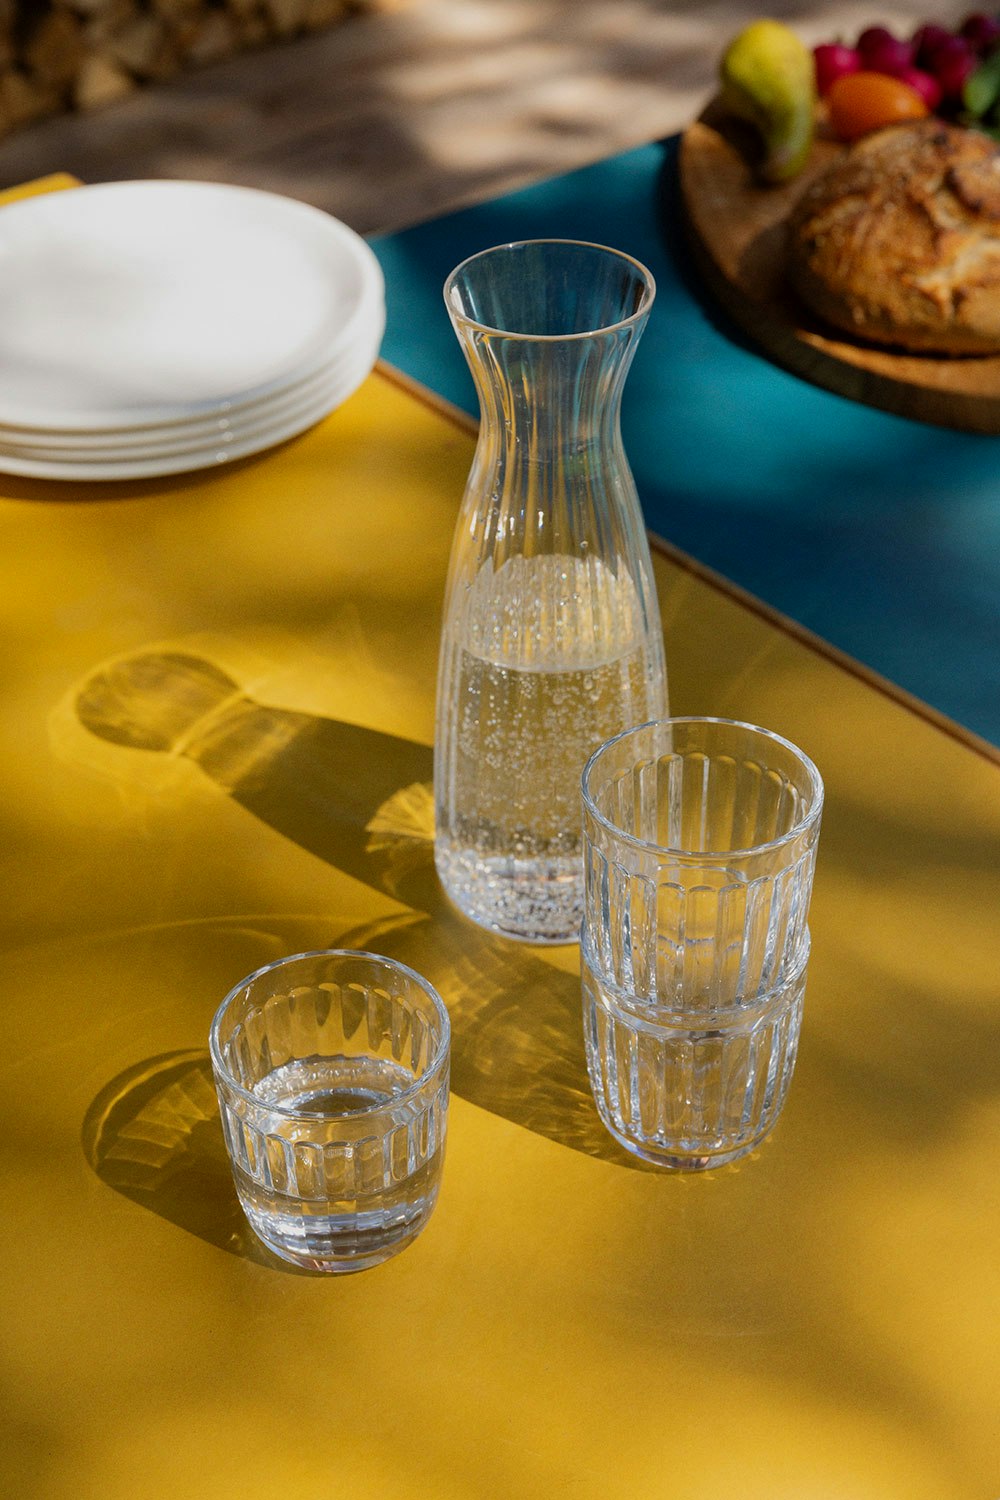 Beautiful carafes and jugs to transform your table covering